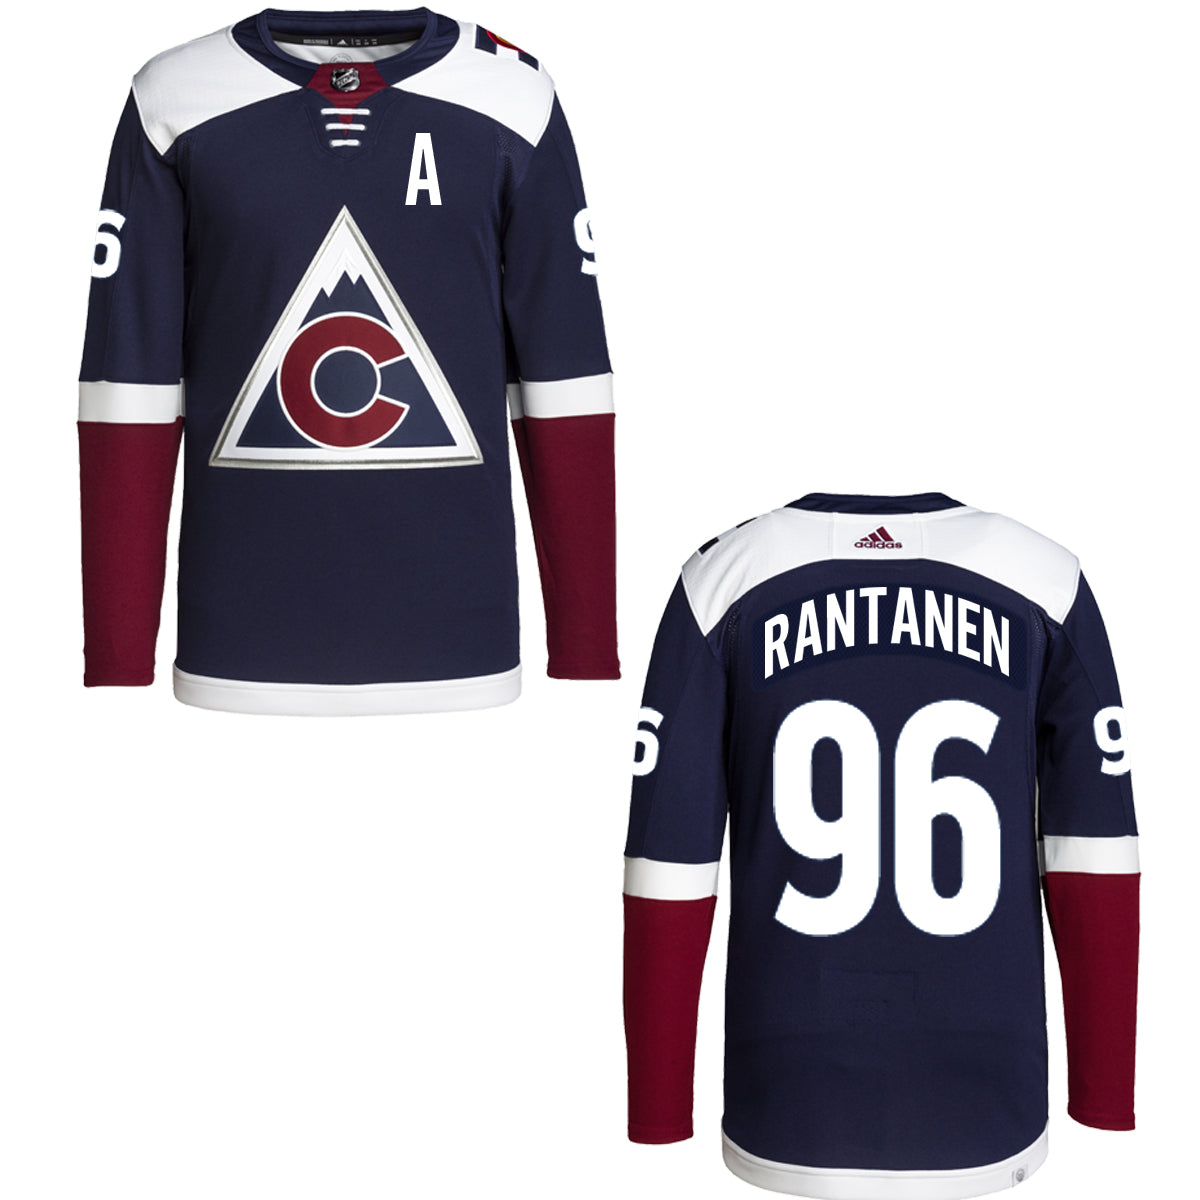 Avalanche Third Personalized Authentic Blue Jersey (S-3XL)